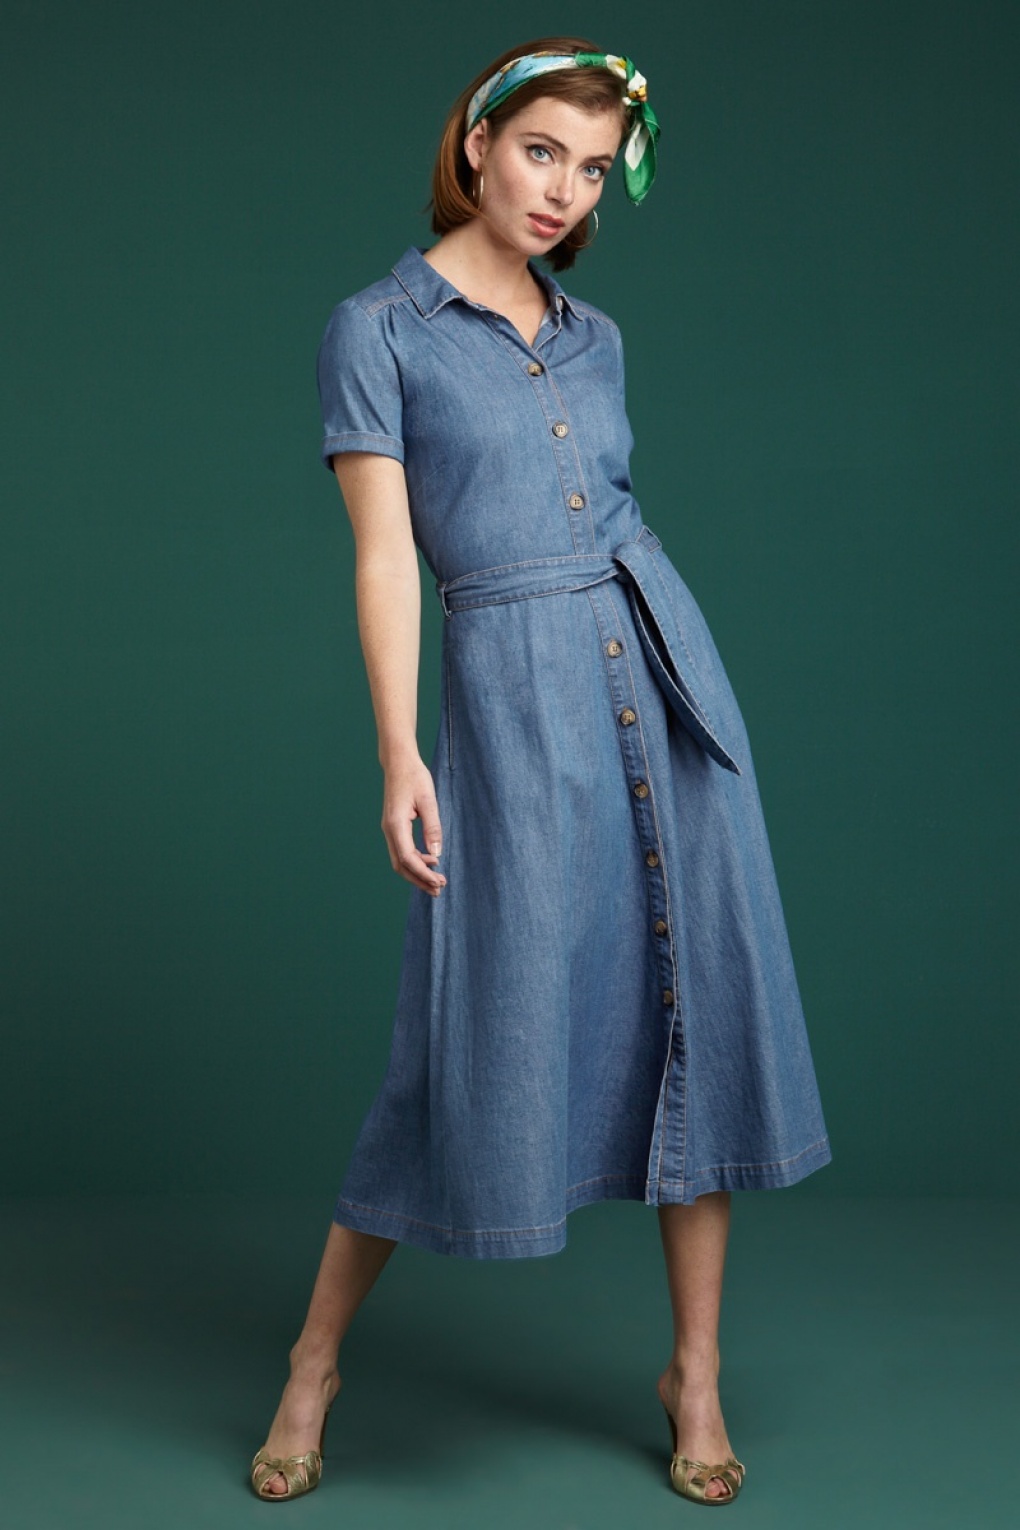 Super 60s Olive Chambray Dress in River Blue GU-36